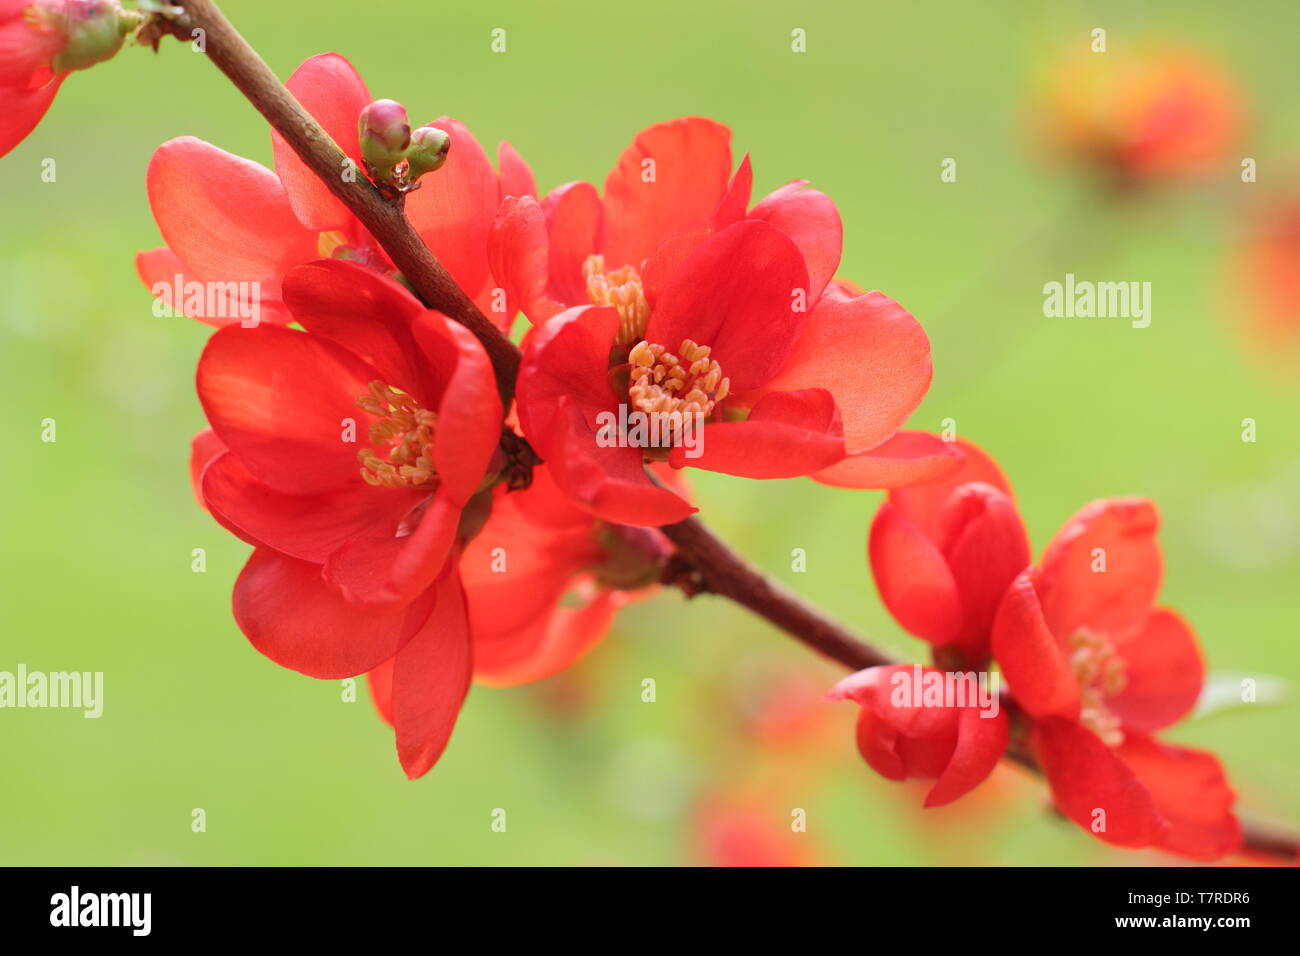 Chaenomeles superba 'Clementine'. Vibrant double blooms of Japanese quince 'Clementine' Stock Photo